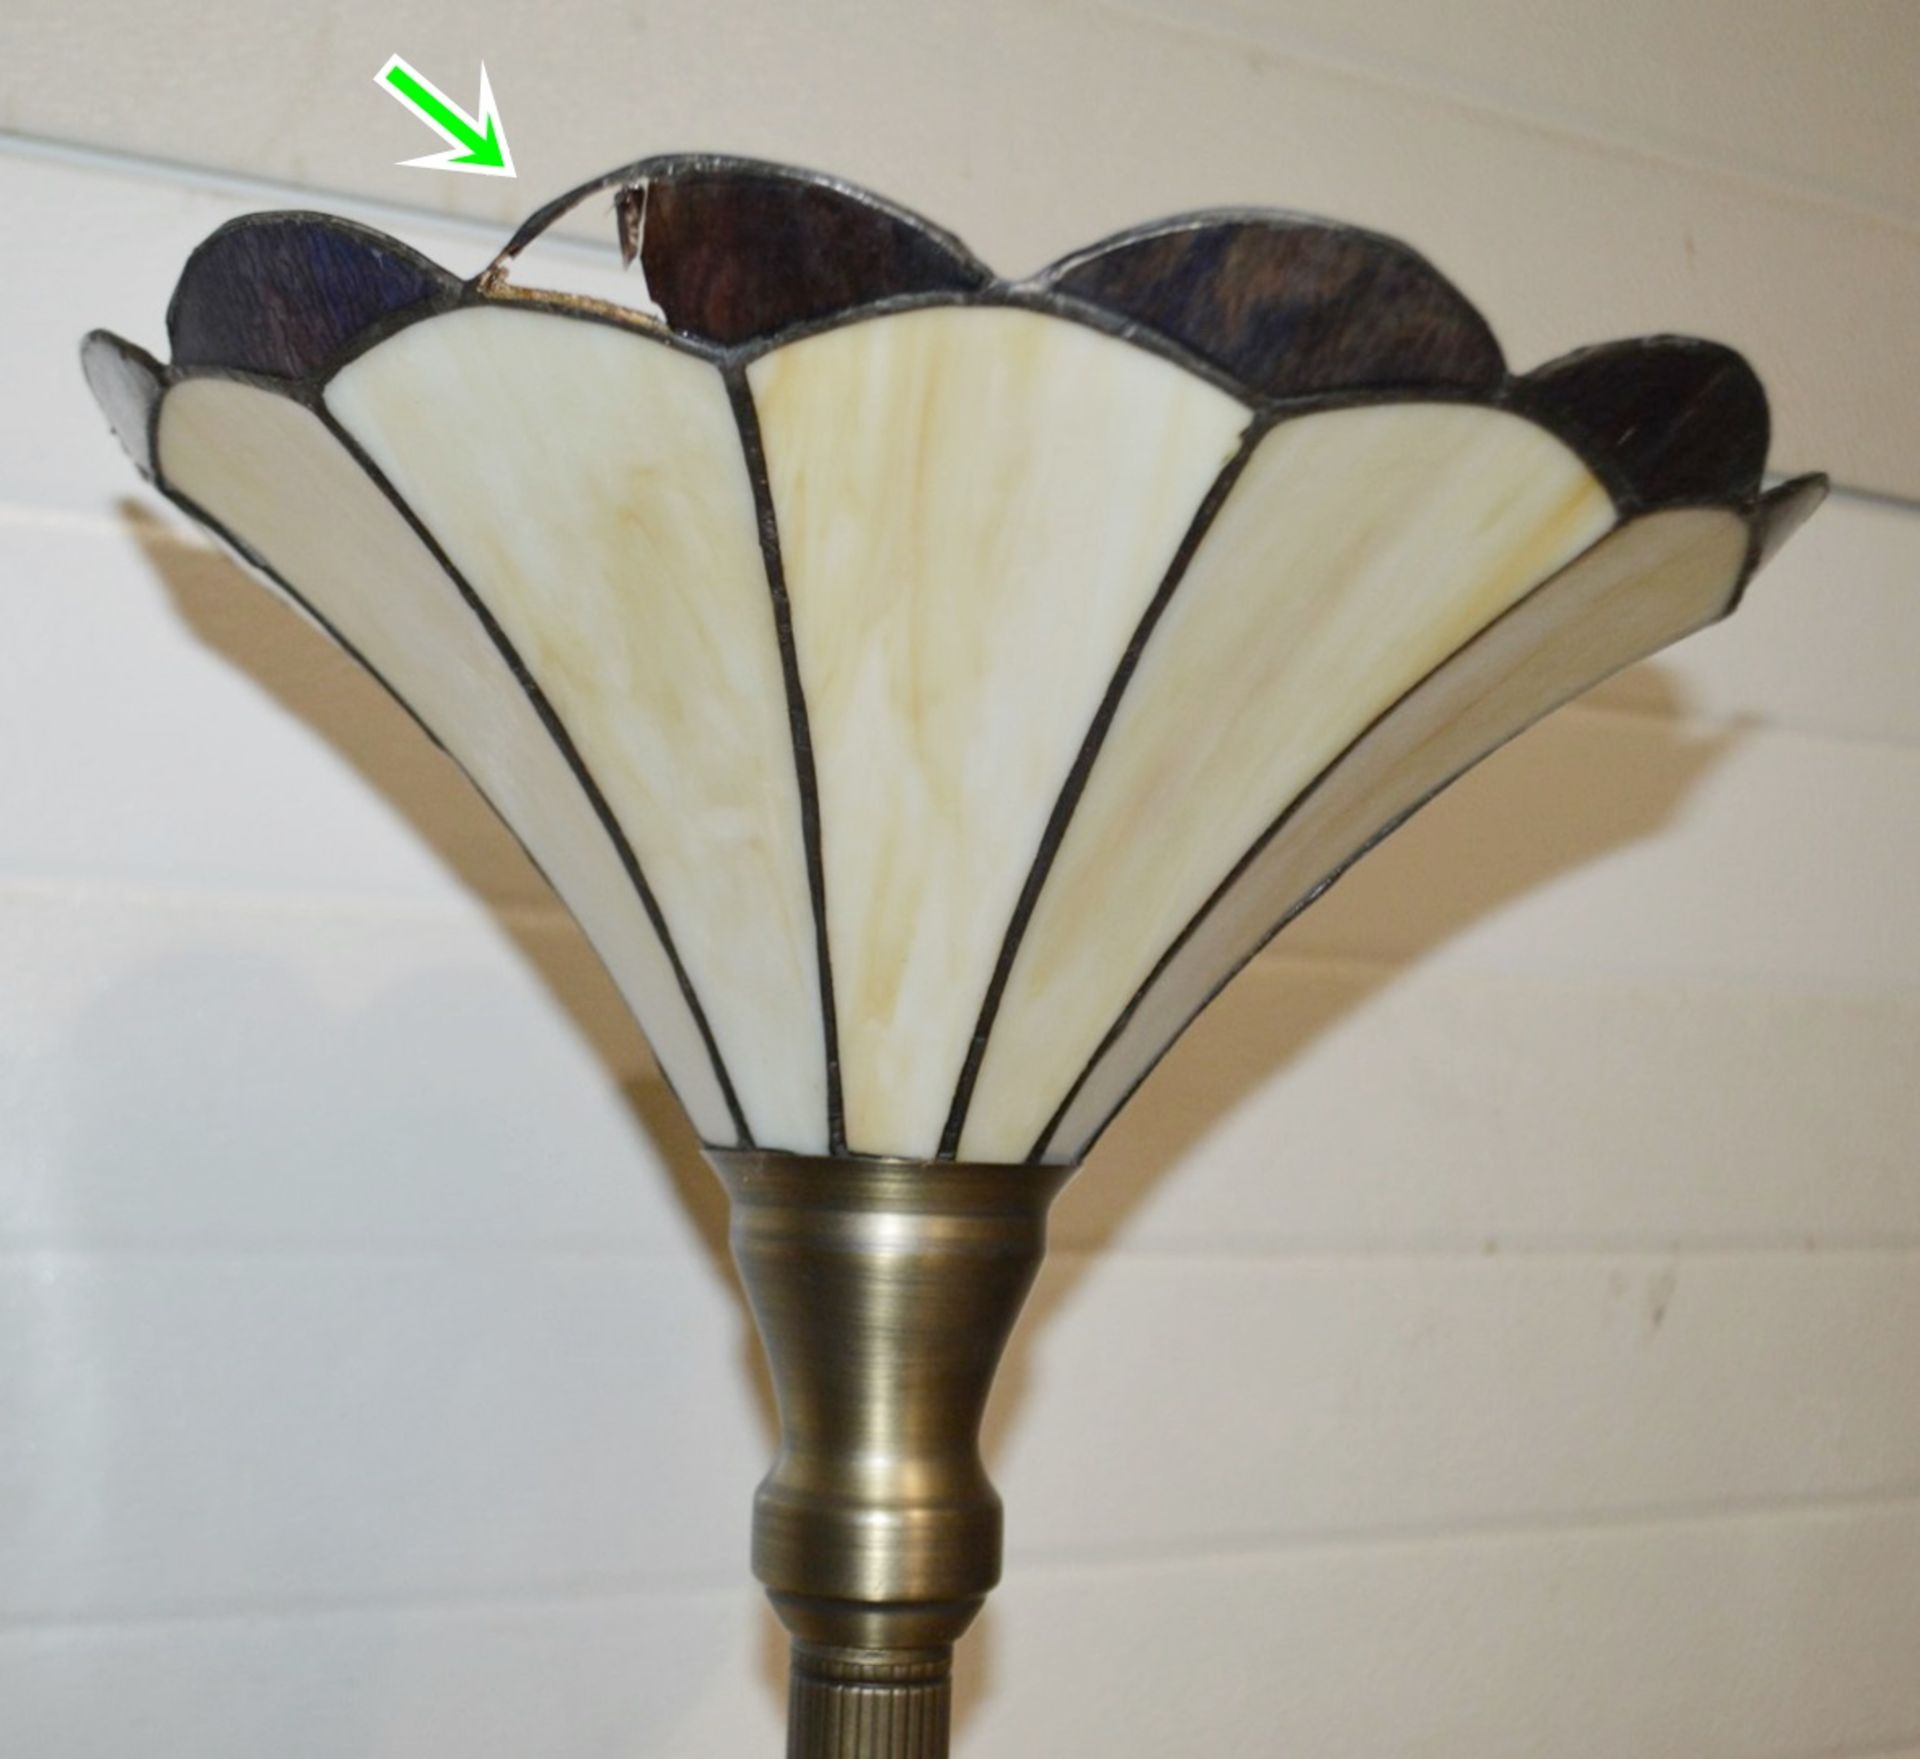 1 x Floorstanding Tiffany-style Lamp With A Glass Uplighter Shade And An Aged Bronze Finish - From - Image 9 of 10